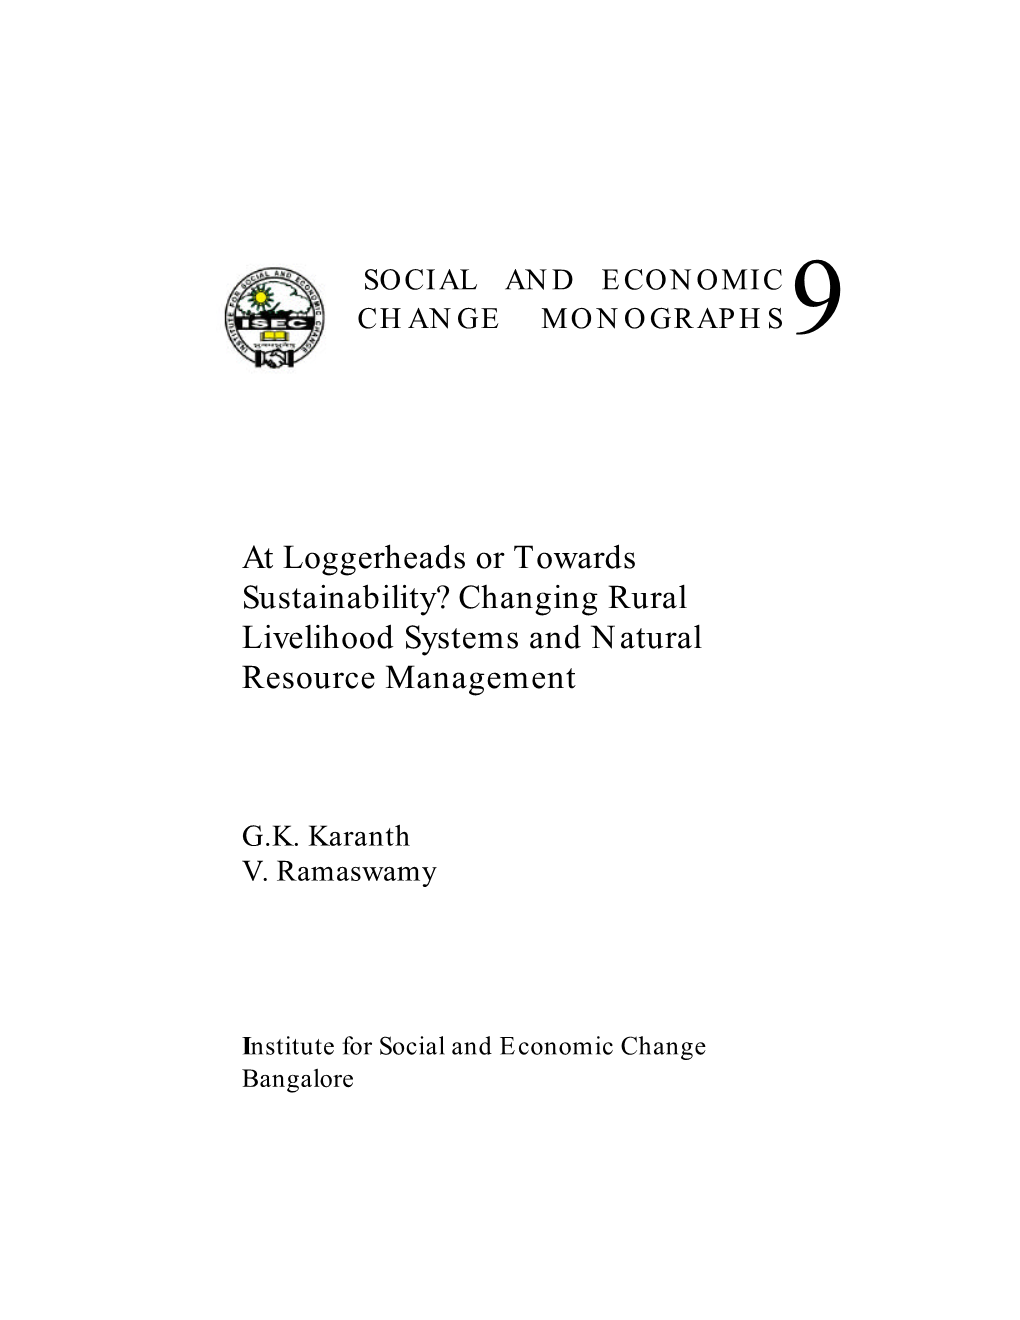 Changing Rural Livelihood Systems and Natural Resource Management